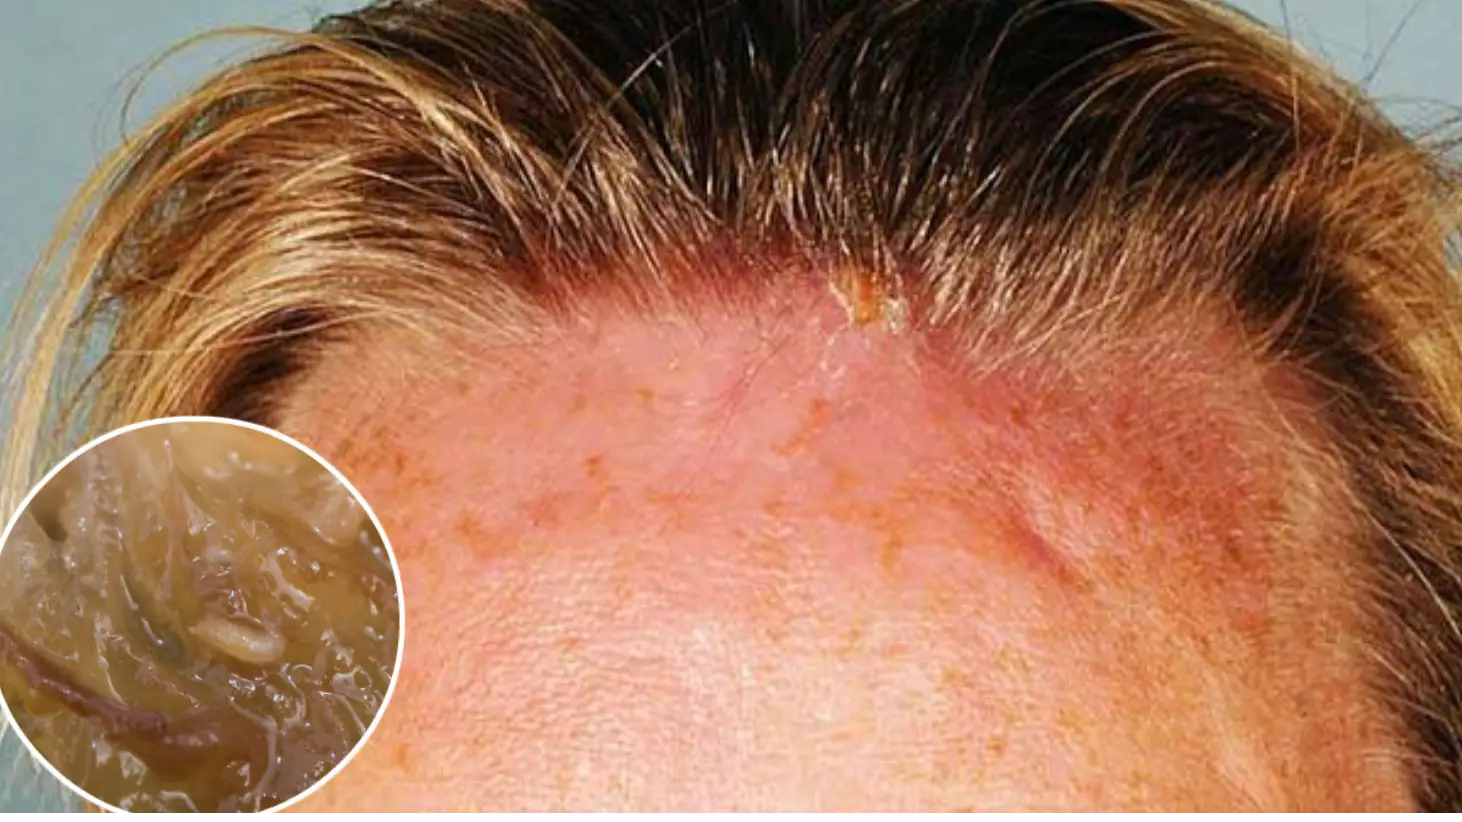 Woman Visits Doctor With Swollen Head And Two Maggots Are Dug Out